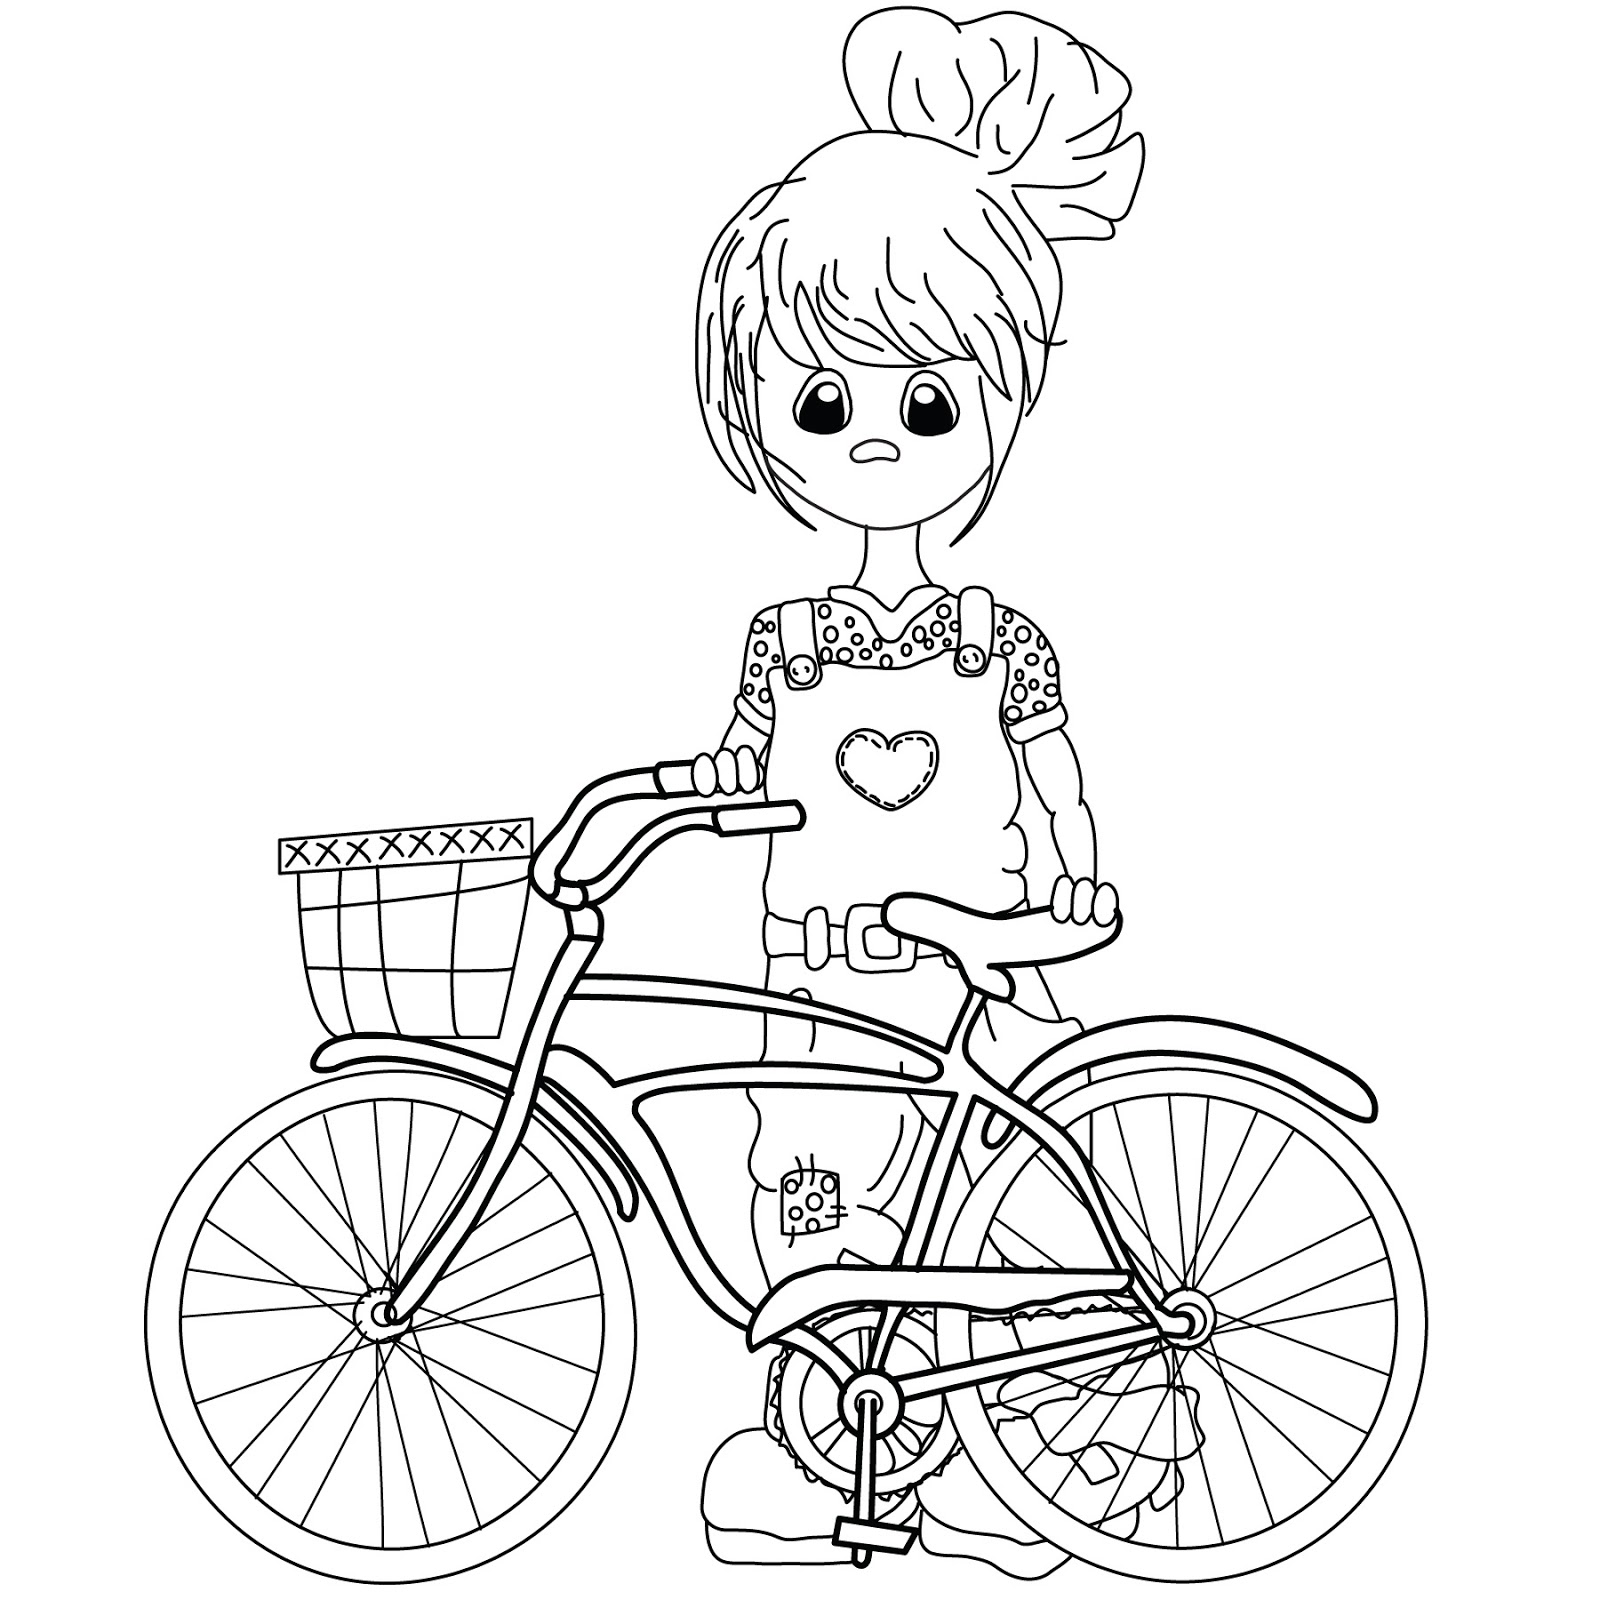 My cycle | Drawing for kids, Cycle drawing, Drawings